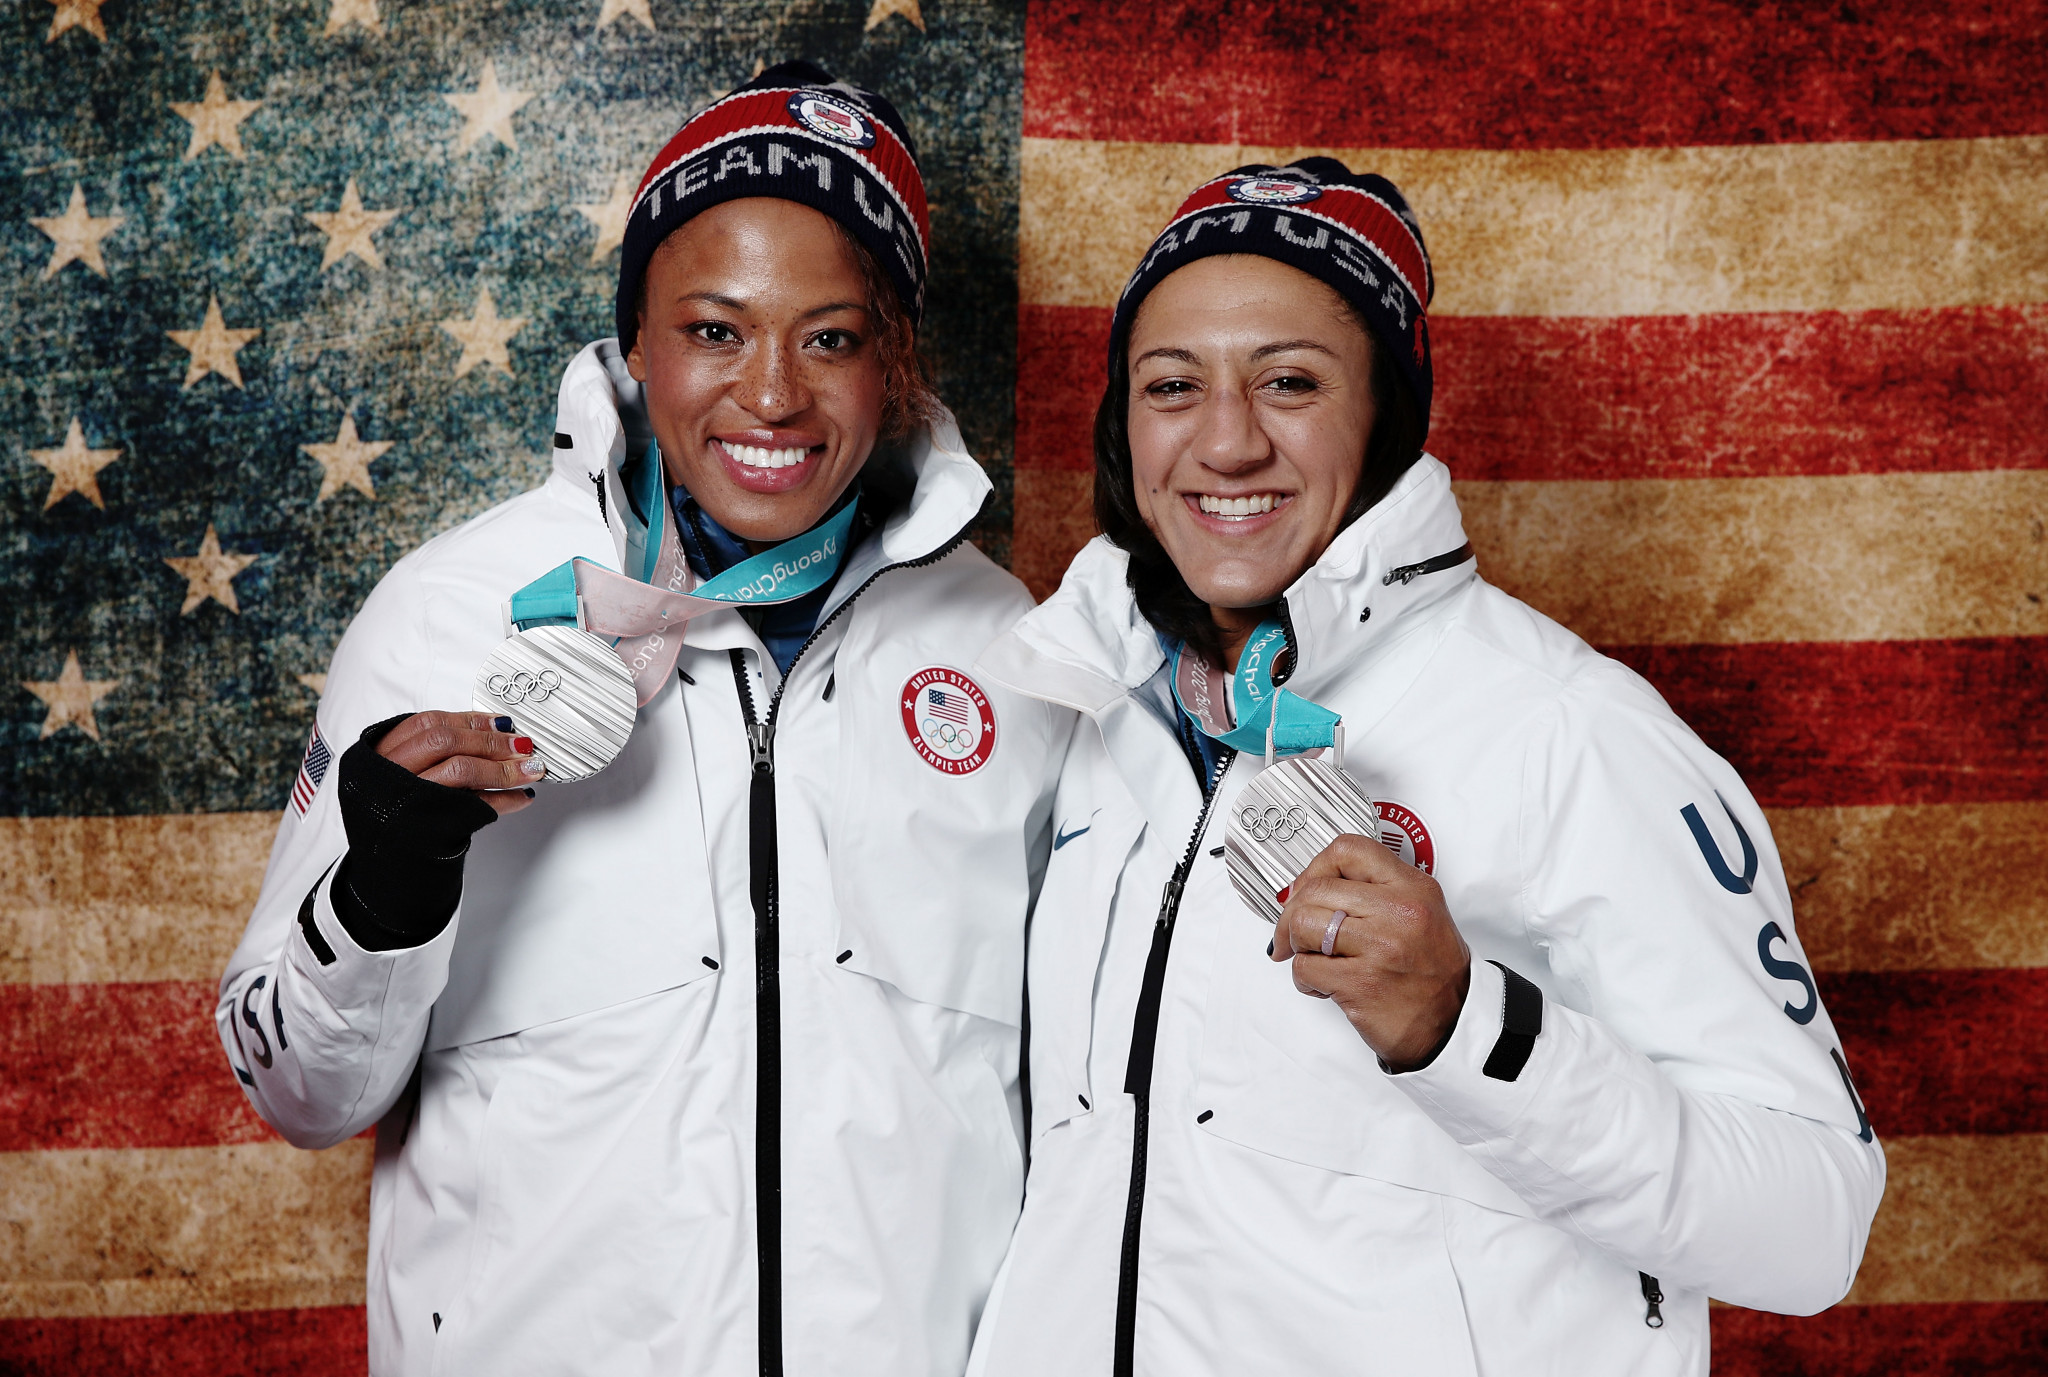 Elana Meyers Taylor, right, and Lauren Gibbs won United States' only bobsleigh medal at Pyeongchang 2018